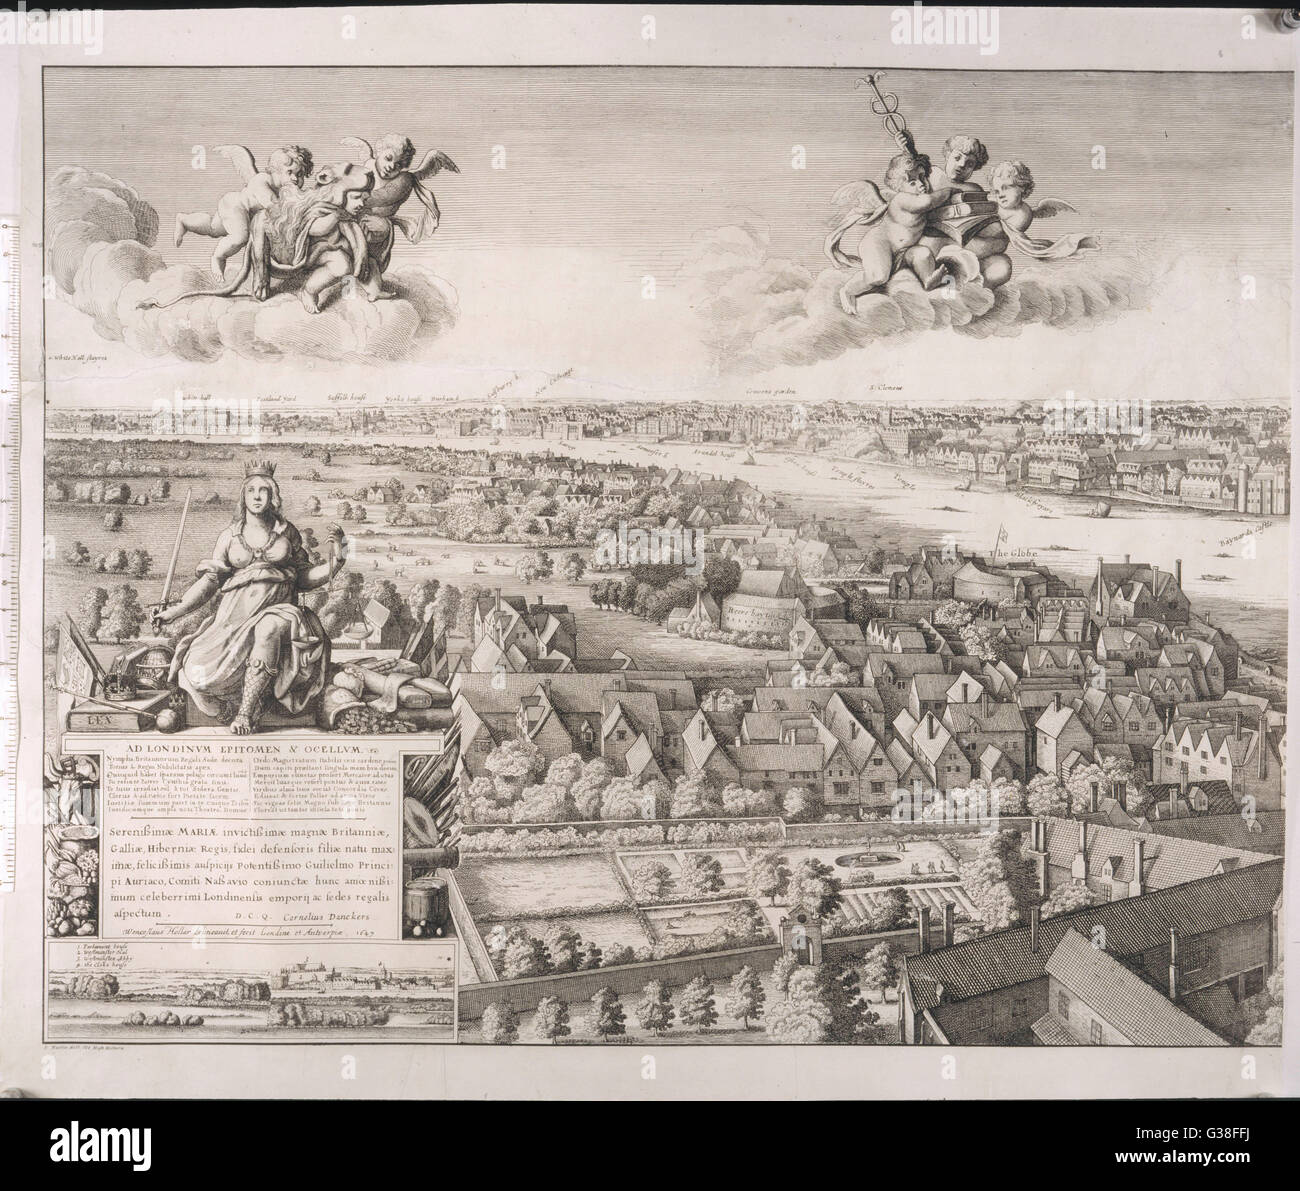 section 1 of 4 looking upstream,  including the Globe and other theatres       Date: 1647 Stock Photo